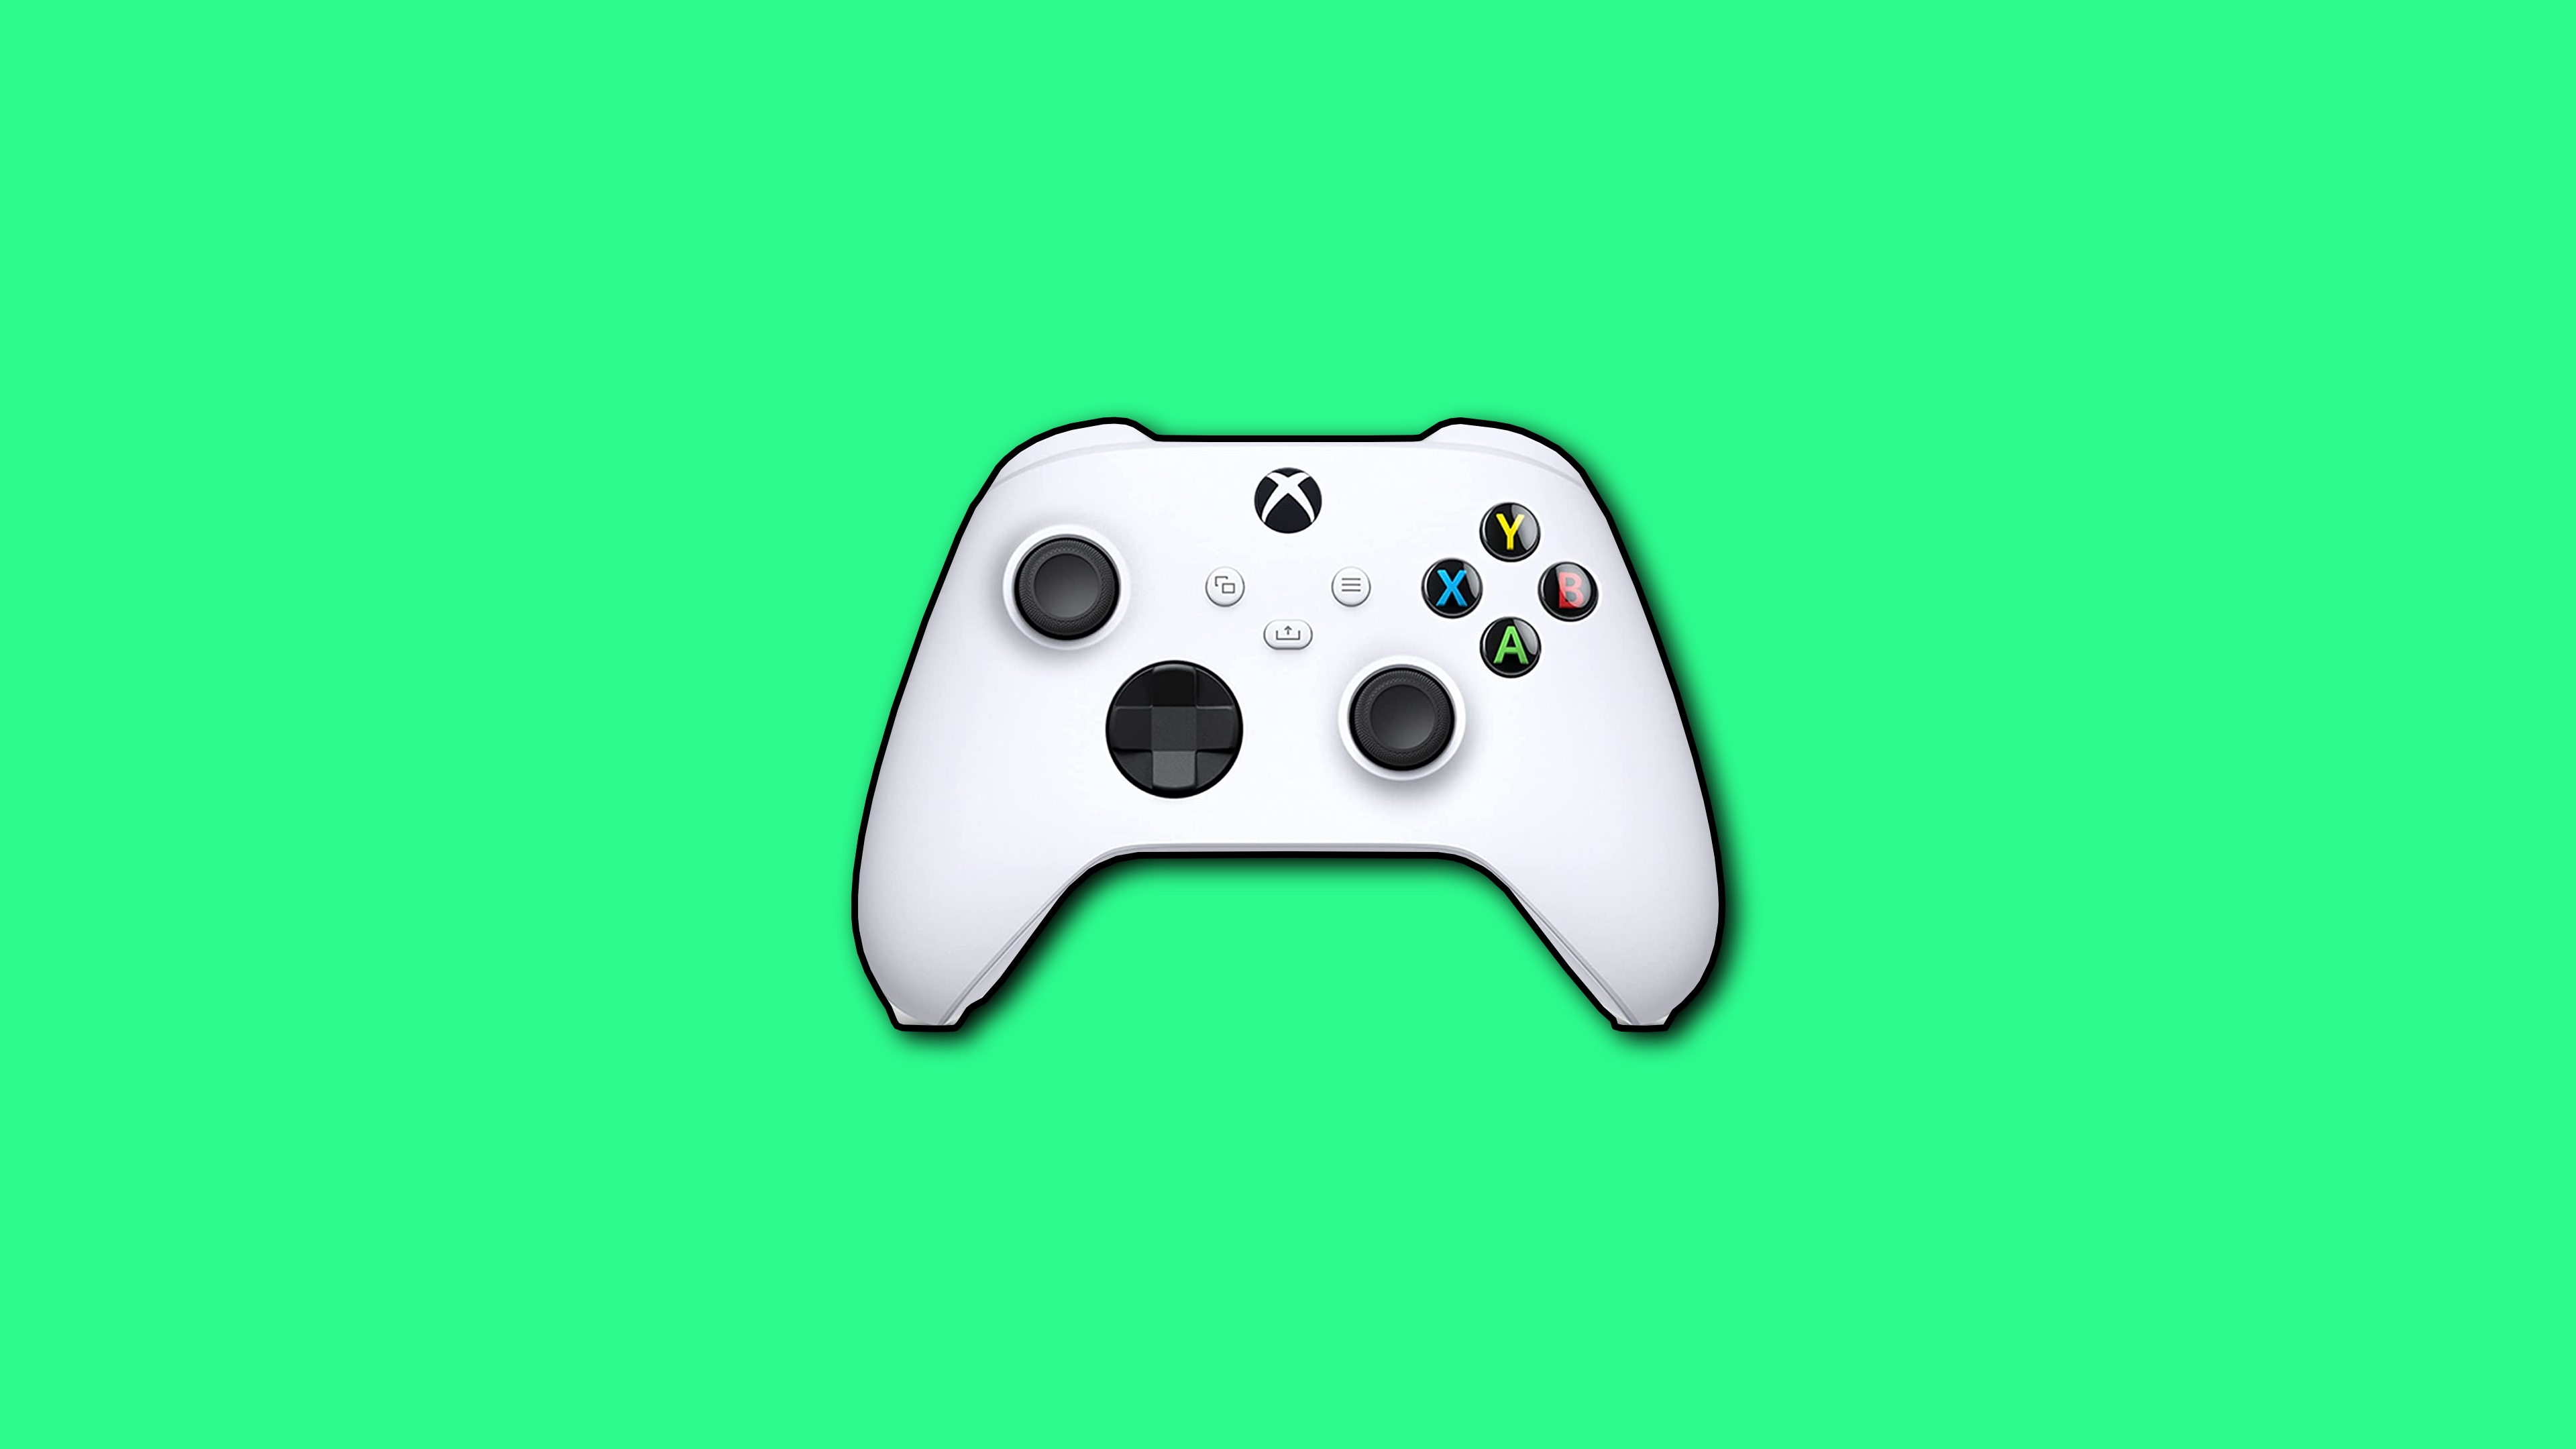 Xbox controller set agains a solid pastel green background